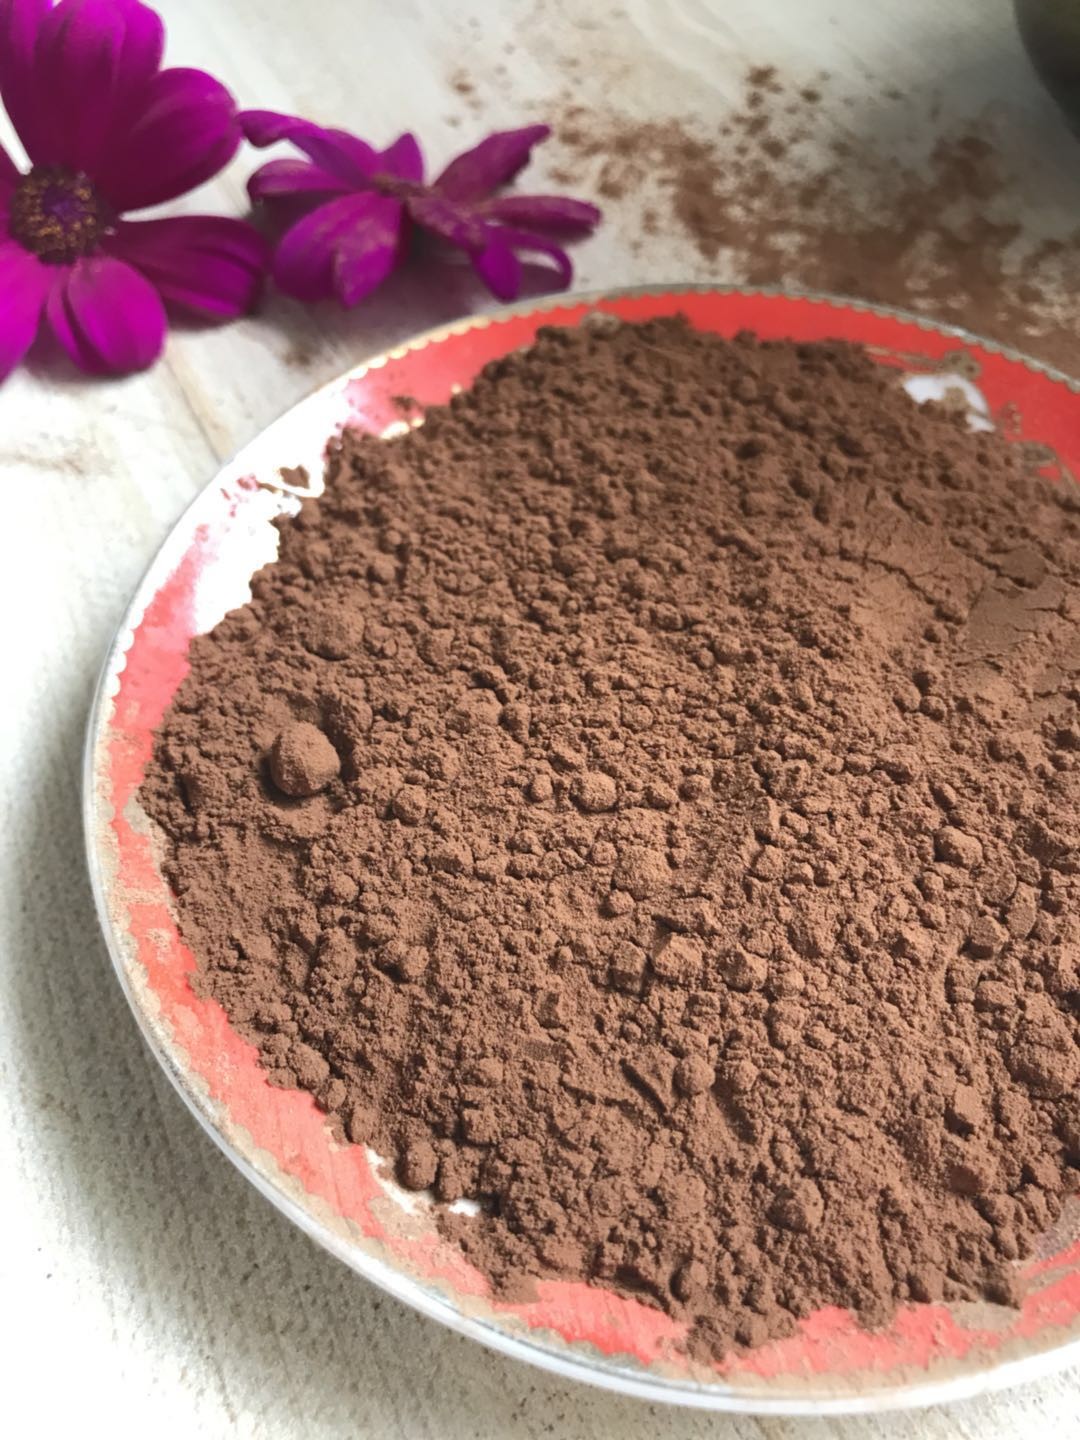  Free Sample Dutch Processed Cocoa Powder Chocolate Raw Material With Stimulant Properties Manufactures